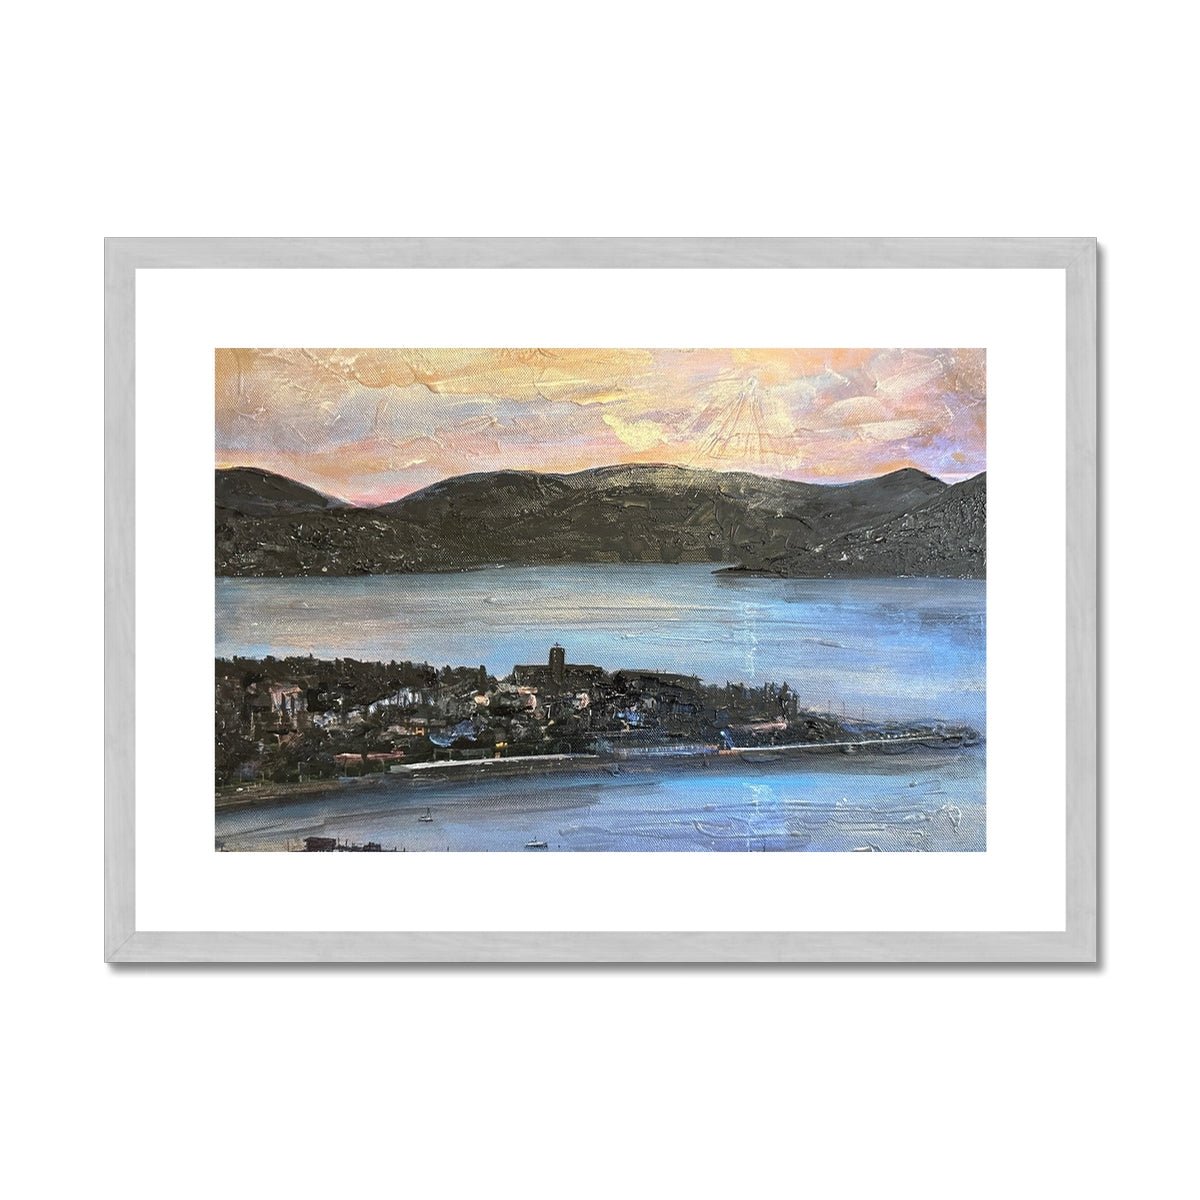 From Lyle Hill Painting | Antique Framed & Mounted Prints From Scotland-Antique Framed & Mounted Prints-River Clyde Art Gallery-A2 Landscape-Silver Frame-Paintings, Prints, Homeware, Art Gifts From Scotland By Scottish Artist Kevin Hunter